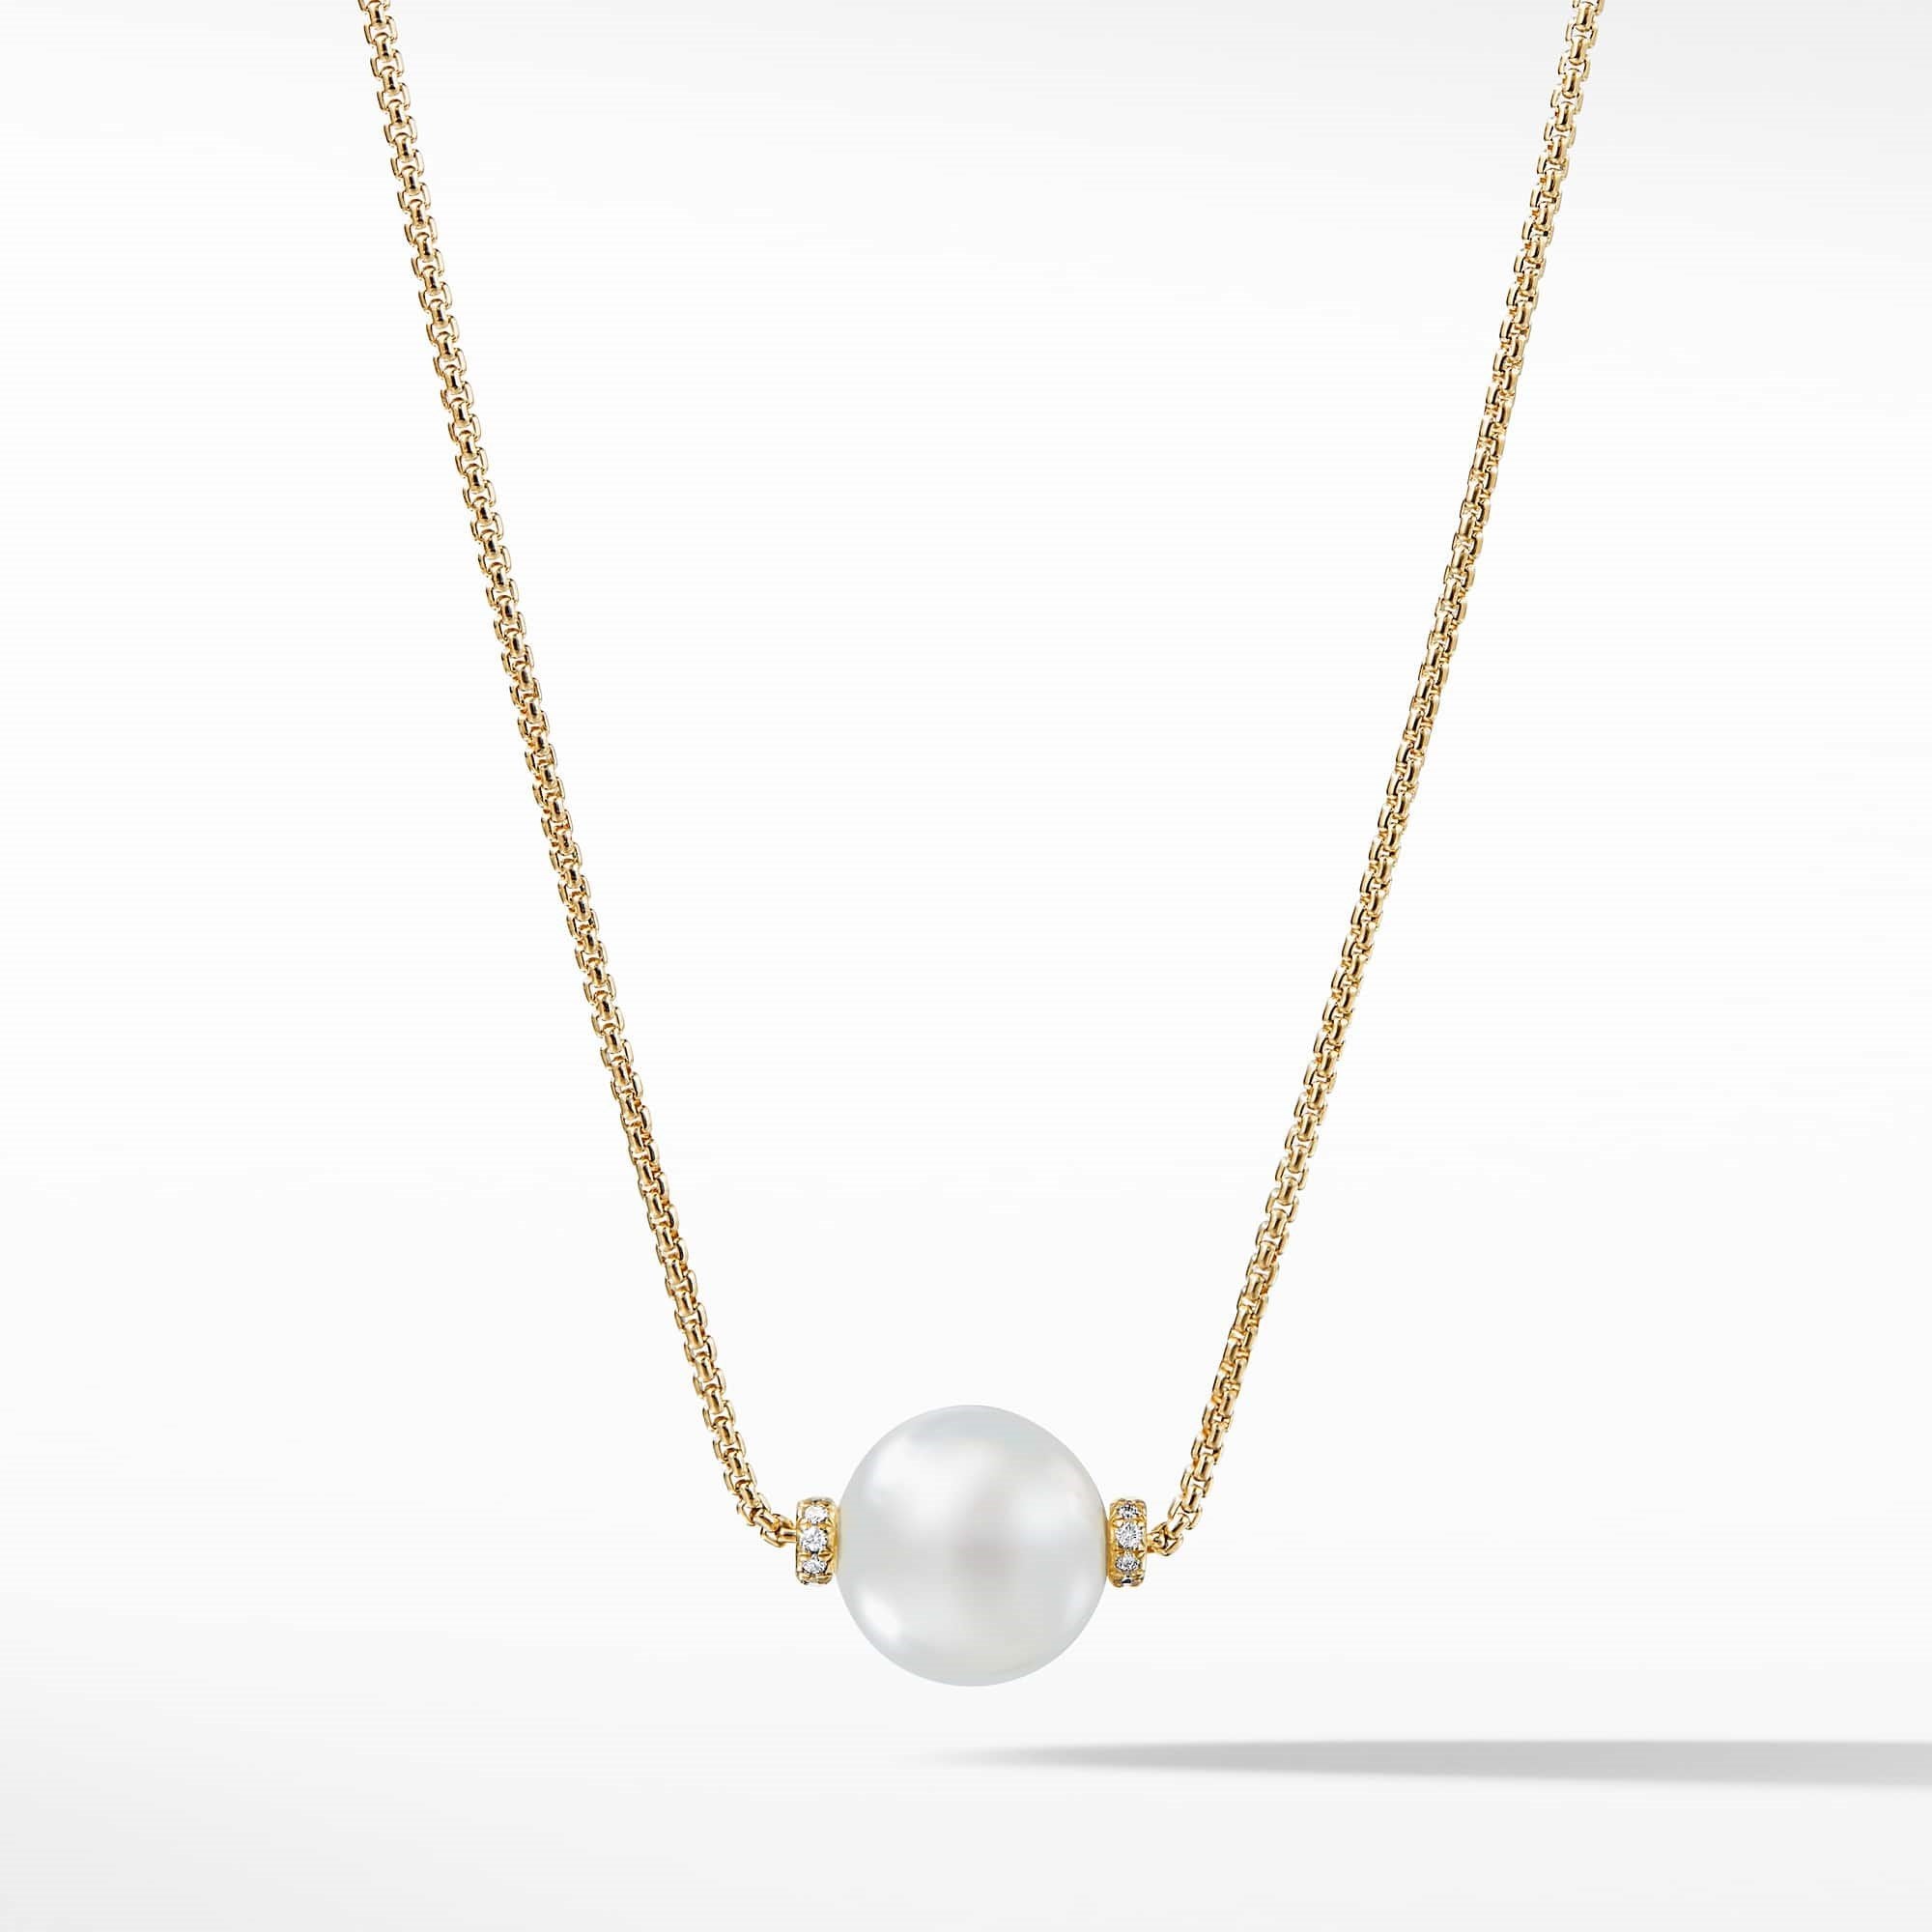 Solari Single Station Necklace in 18k Gold with Diamonds and South Sea White Pearl